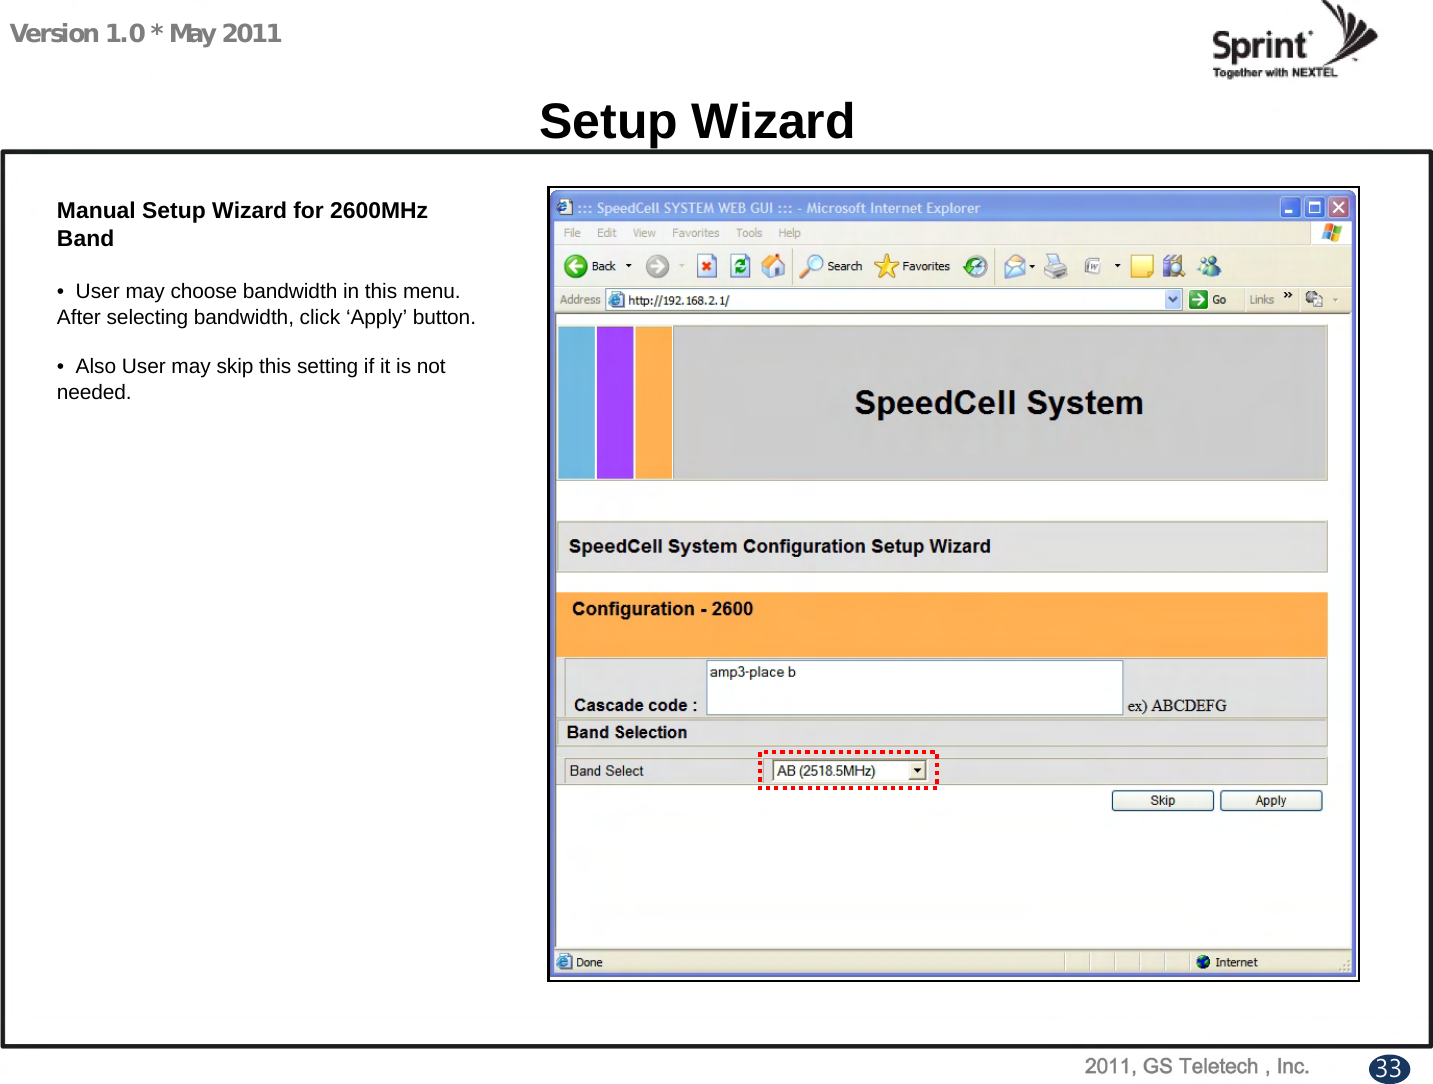 Version 1.0 * May 2011Setup WizardManual Setup Wizard for 2600MHz Band• User may choose bandwidth in this menu. After selecting bandwidth, click ‘Apply’ button.• Also User may skip this setting if it is not needed. 33